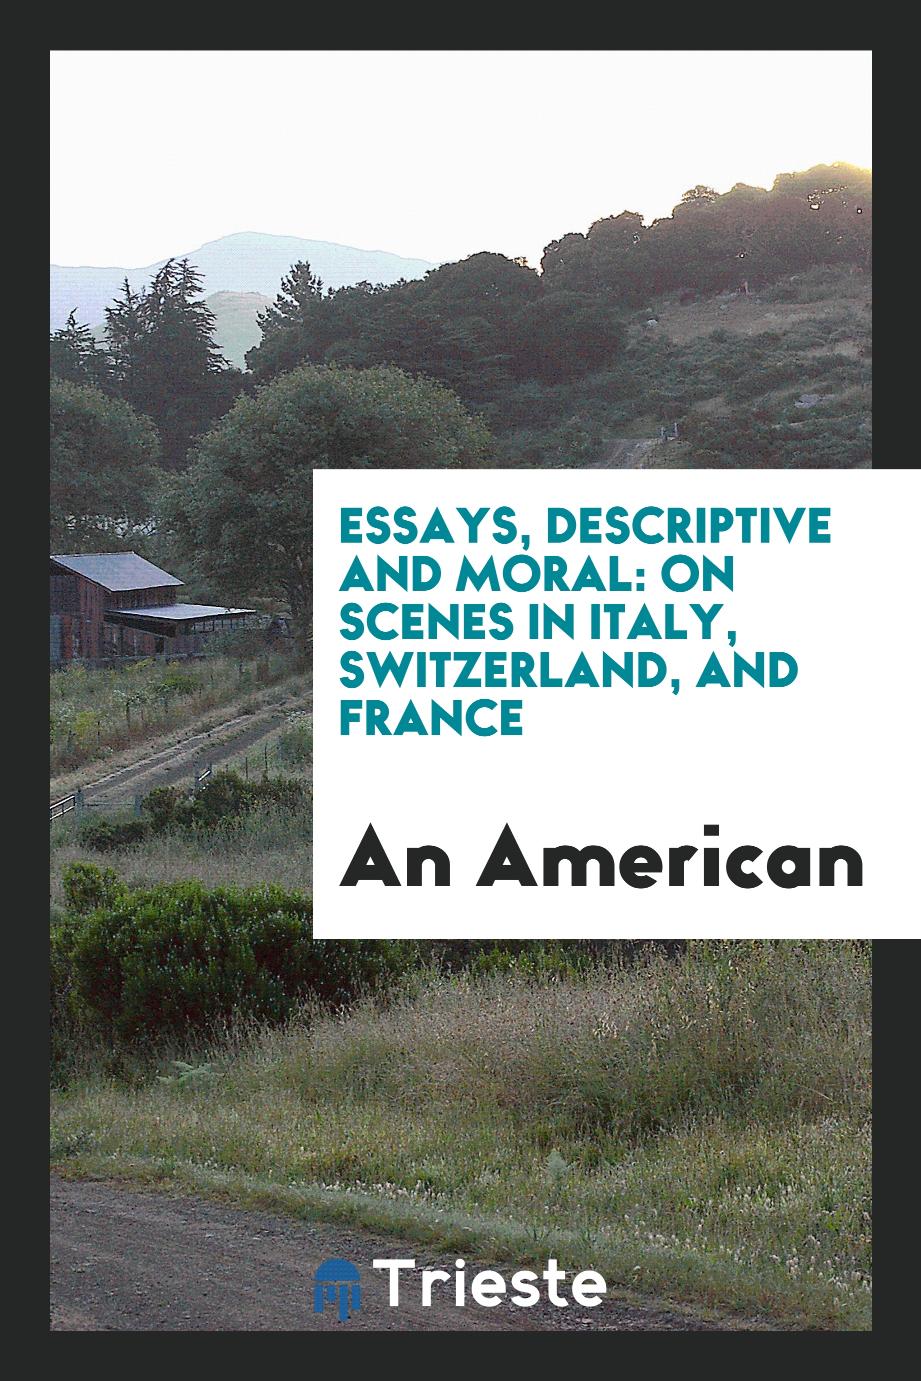 Essays, descriptive and moral: on scenes in Italy, Switzerland, and France